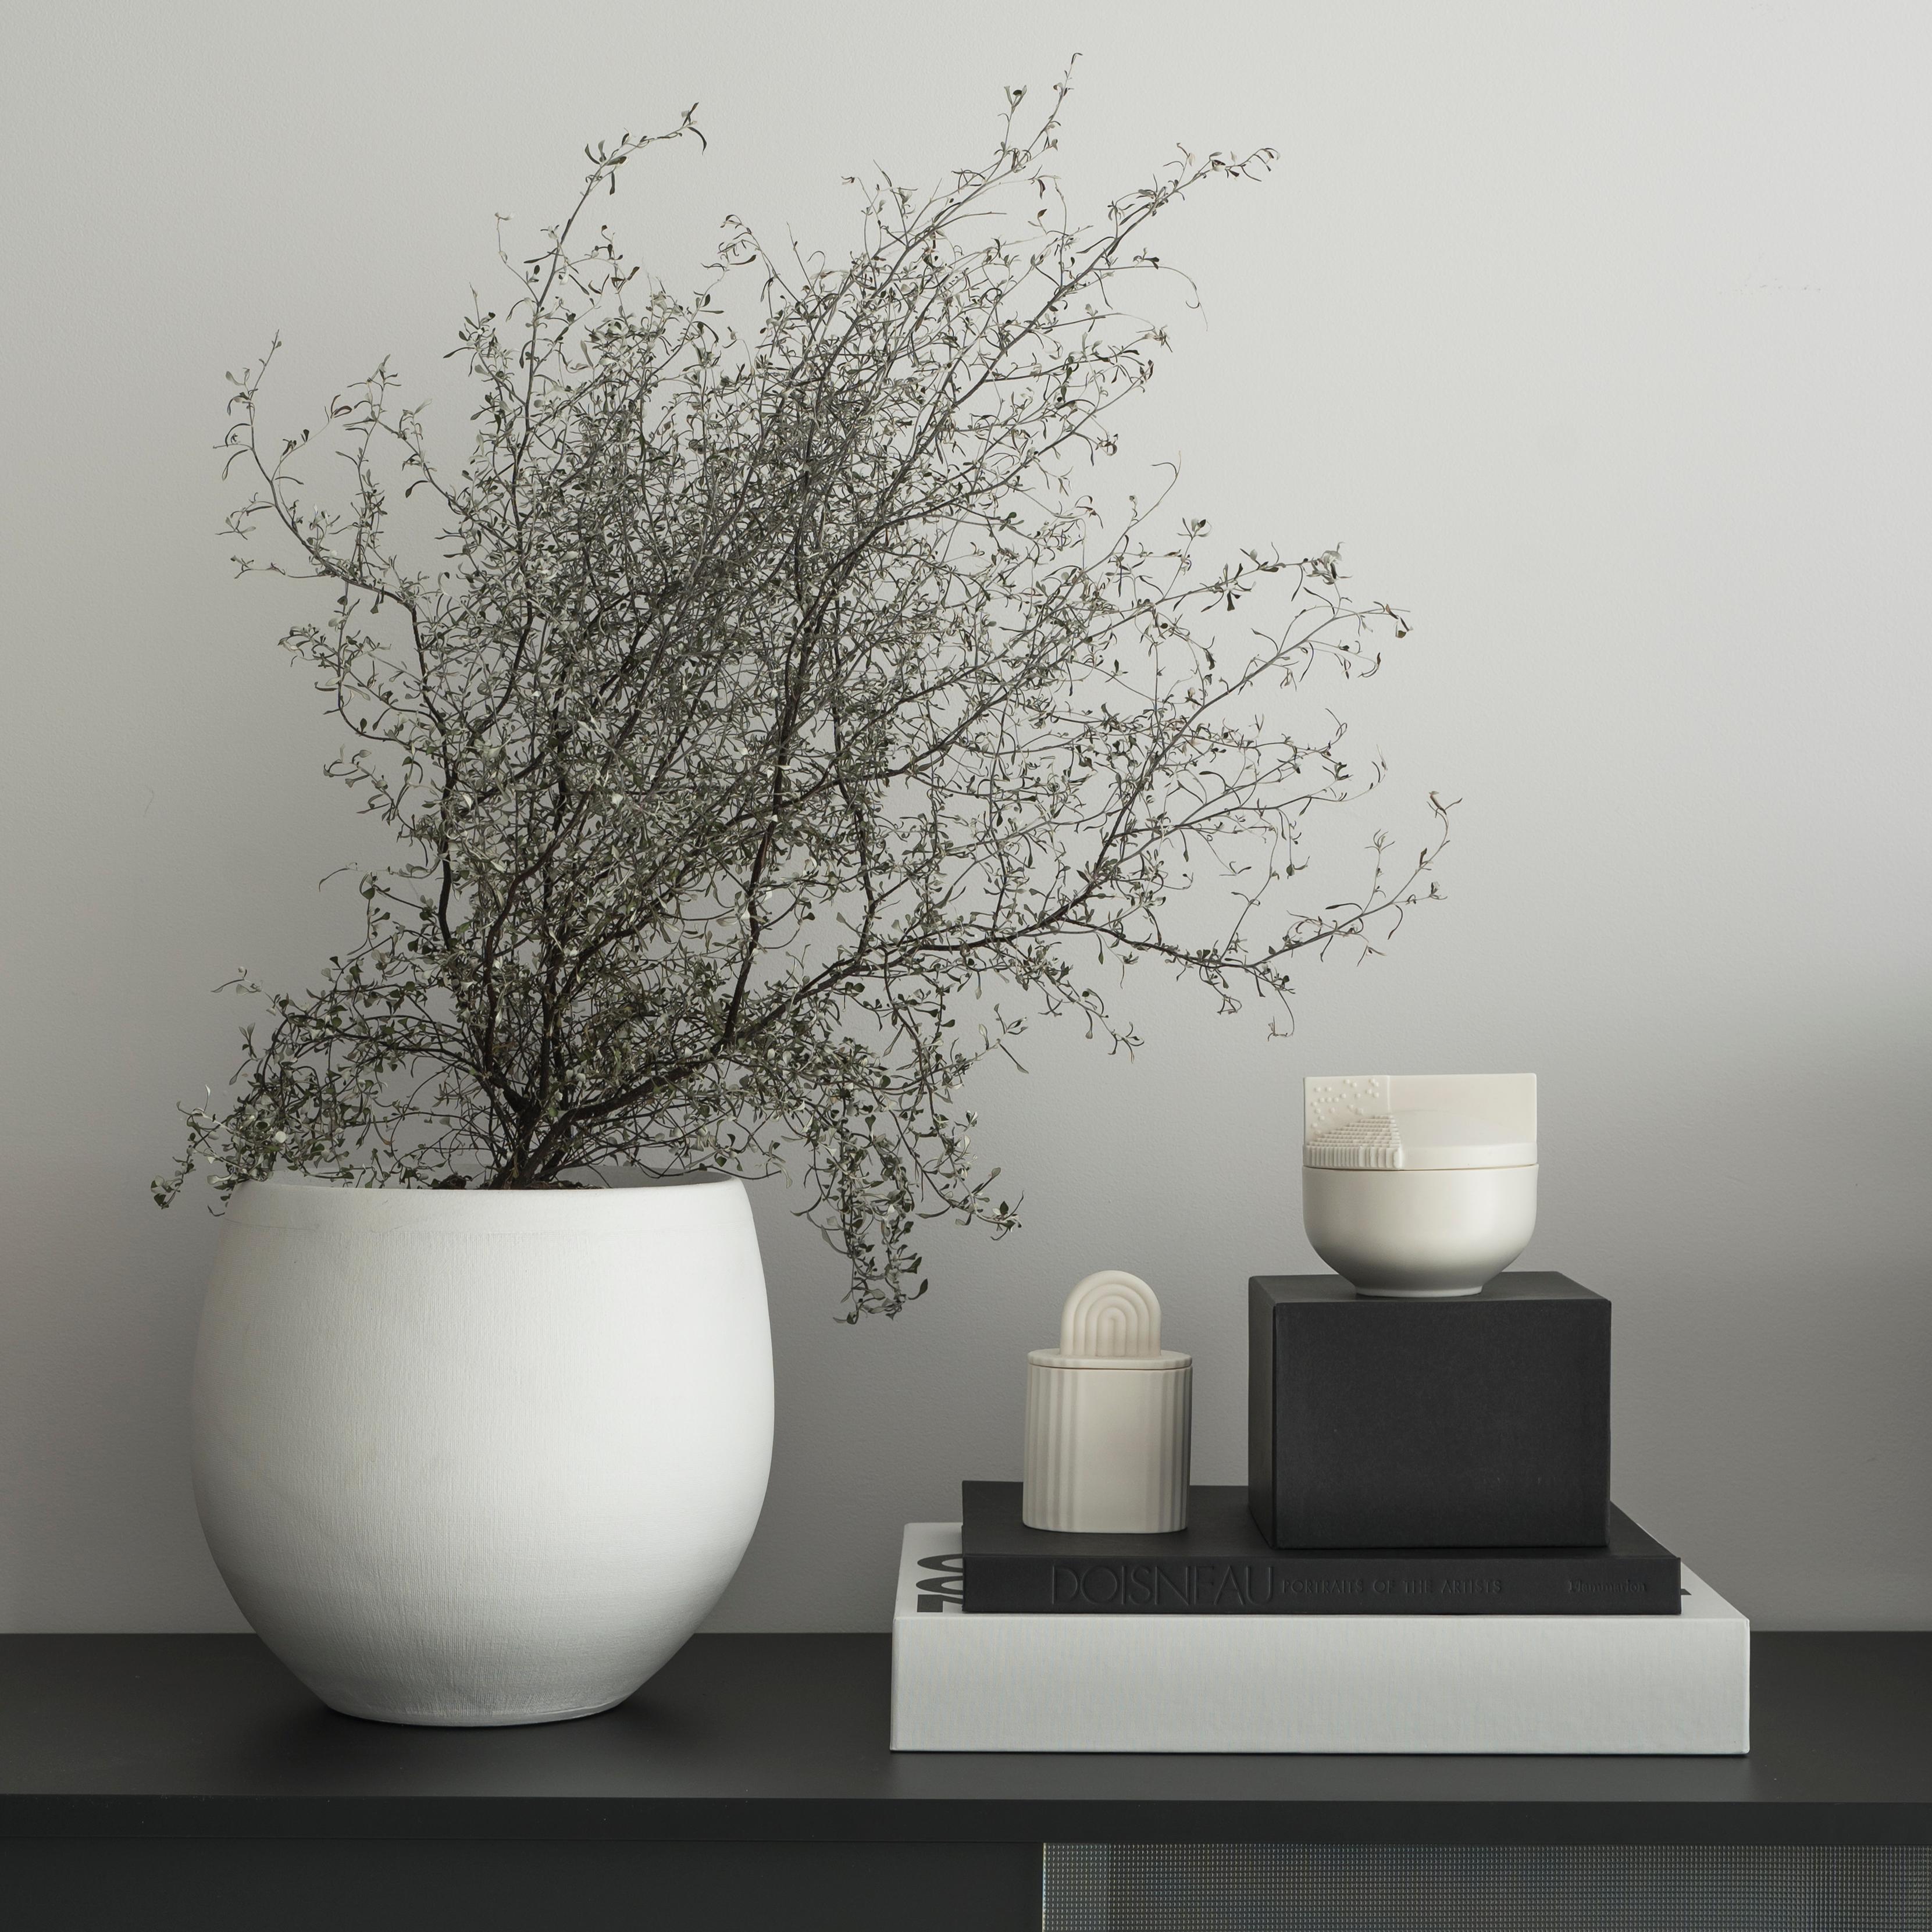 Bazalt - the shape inspired by the irregular basalt rocks. 
Parian porcelain decorative box filled with scented soy wax.
Must have 2022 by Lódz Design Festival.

300 g of scented soy wax (essential or fragrance oils).
Parian porcelain